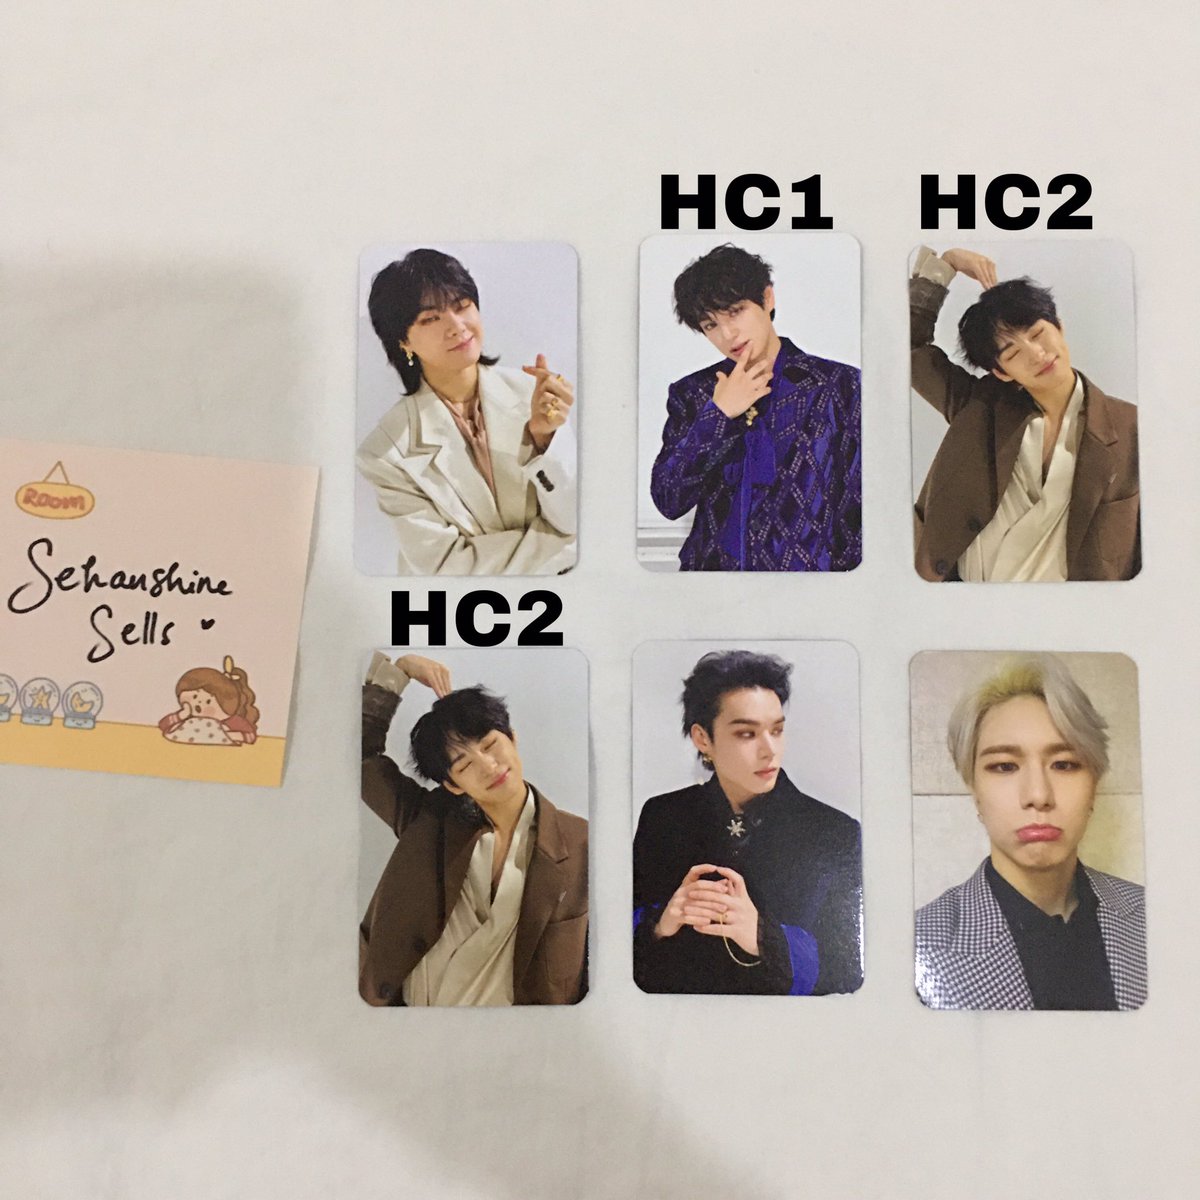 Victon VTFIN PCs100php each Qrt (quote retweet) mine + member + code for chan pcs only